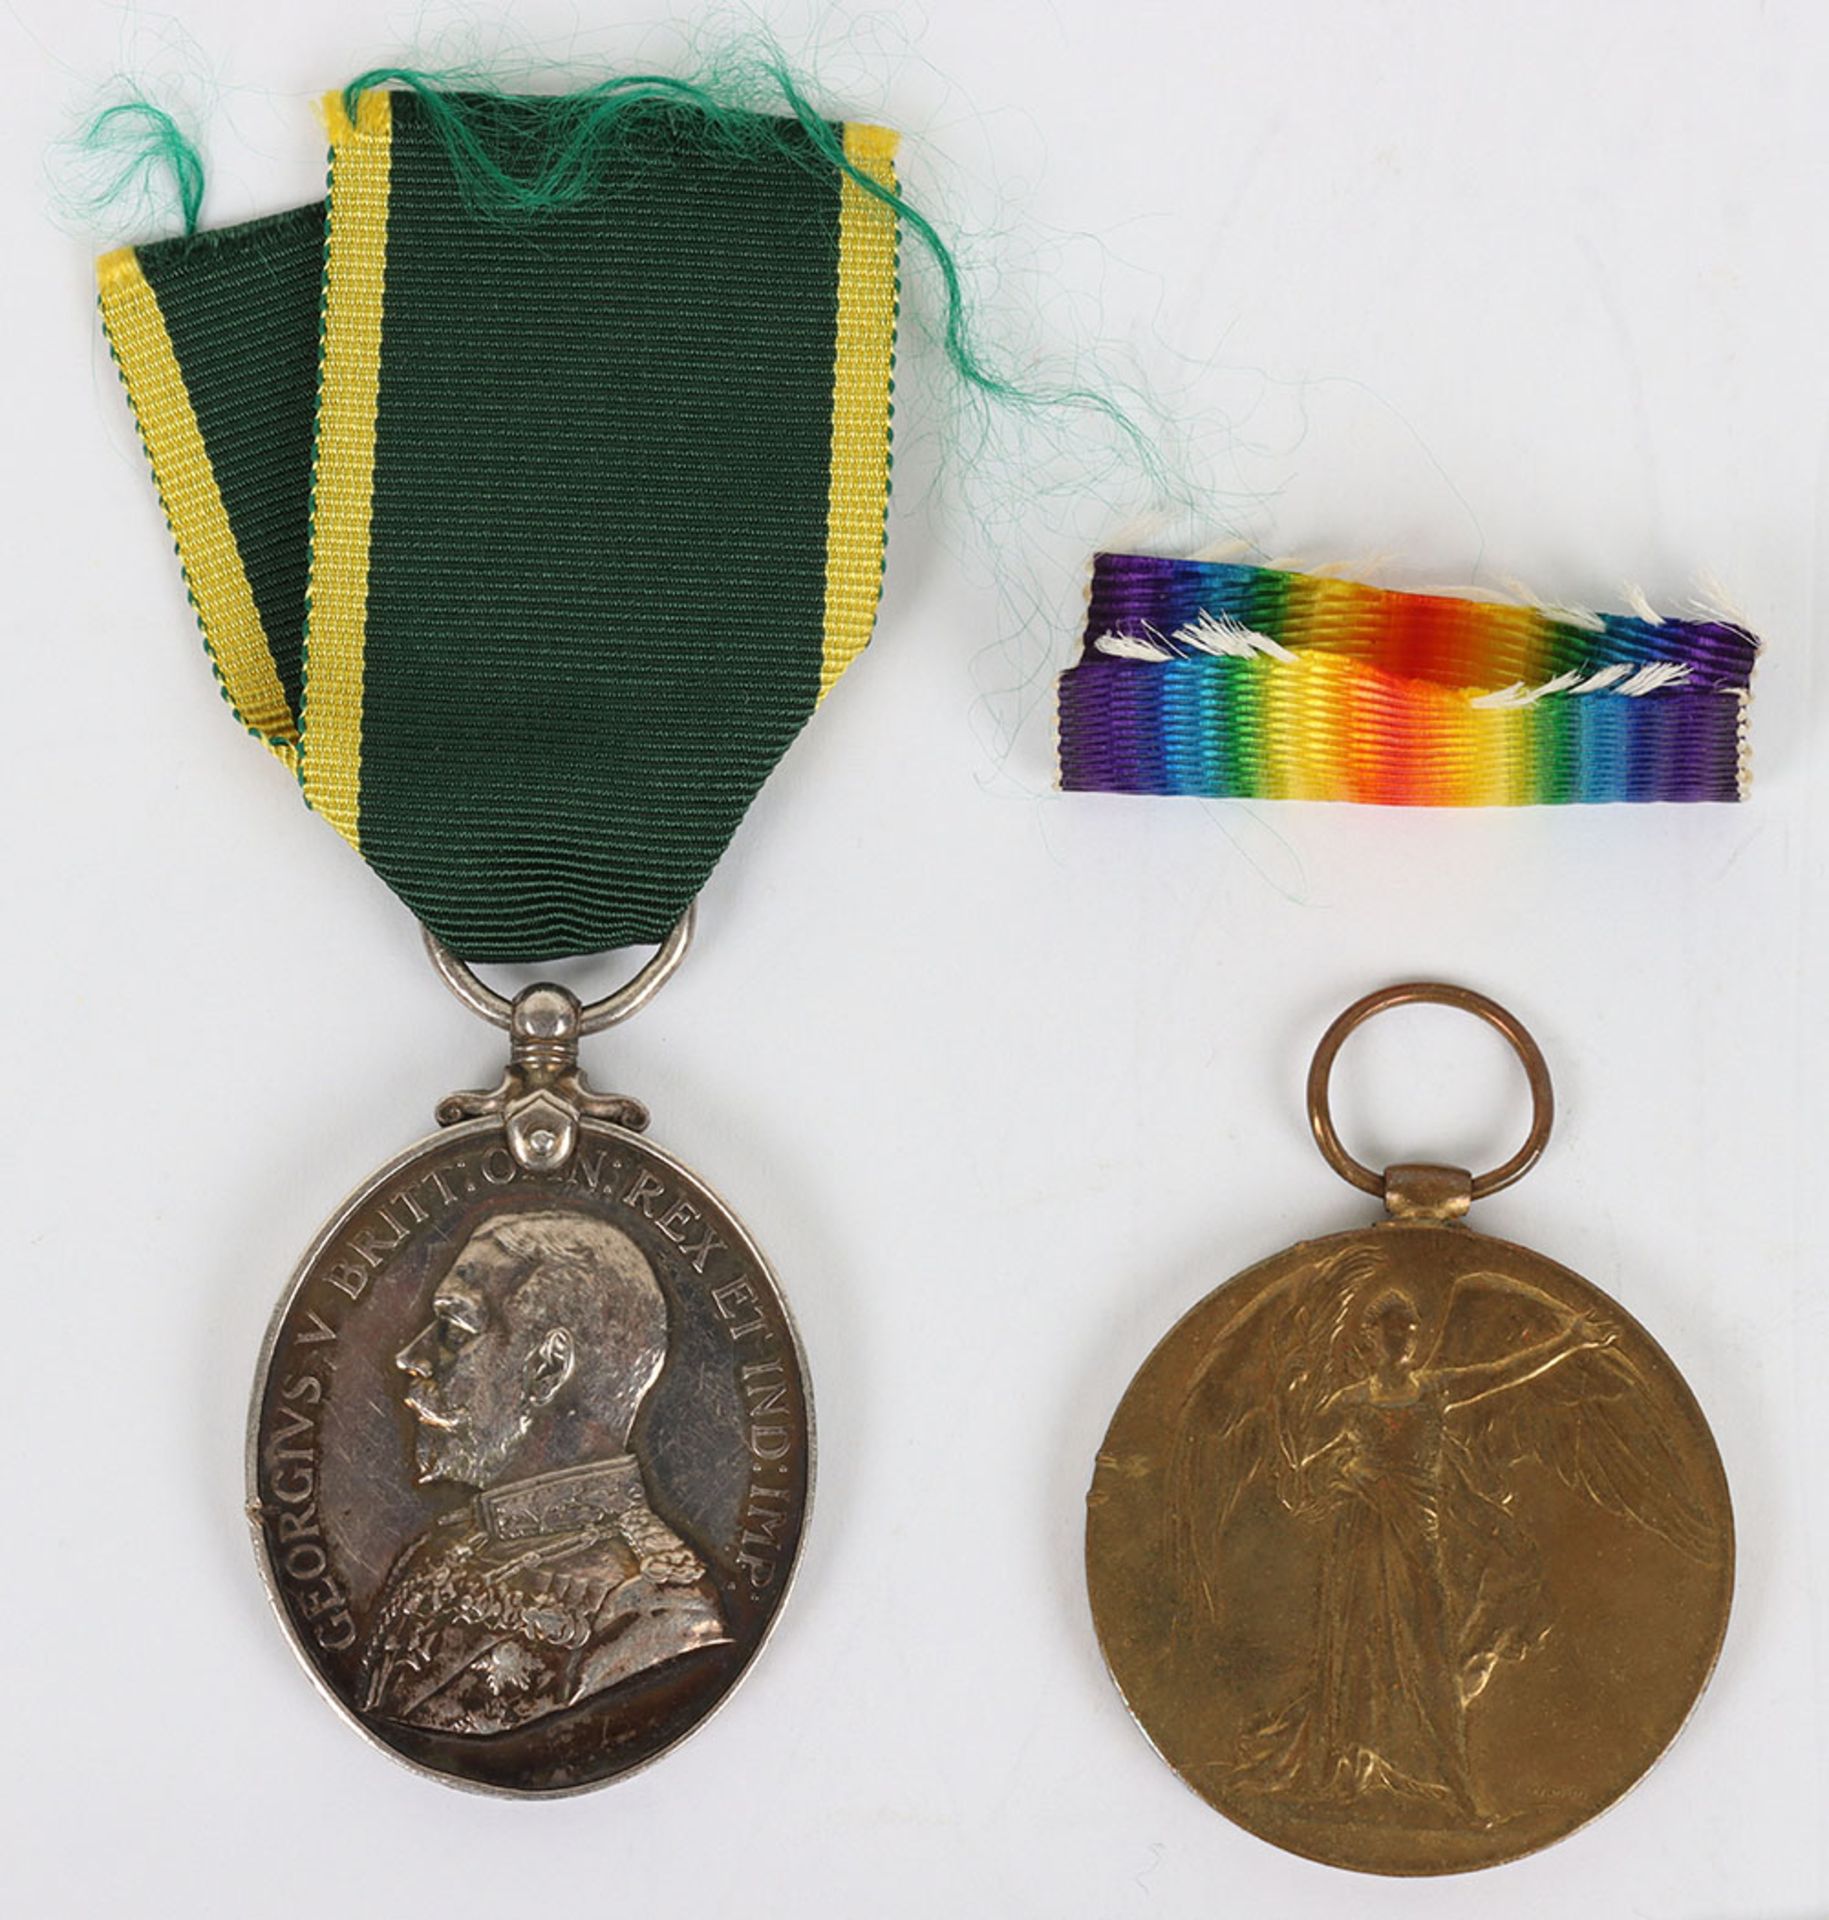 A Territorial Long Service Medal Pair to the Royal Army Medical Corps